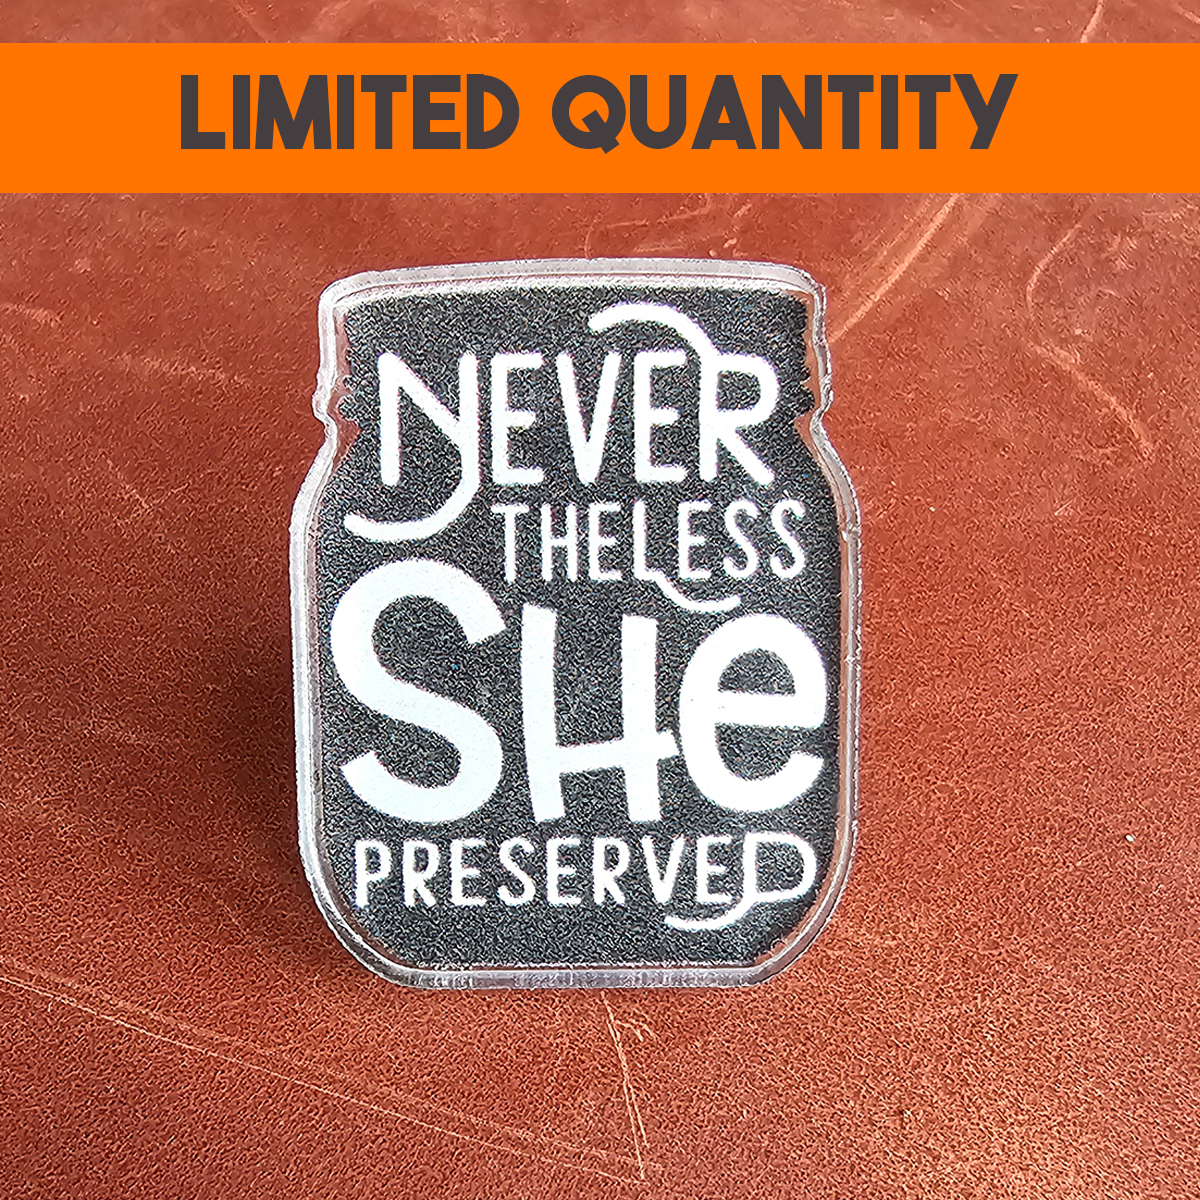 The preservation hobbyist cherishes her Nevertheless She Preserved Pin from The Purposeful Pantry.